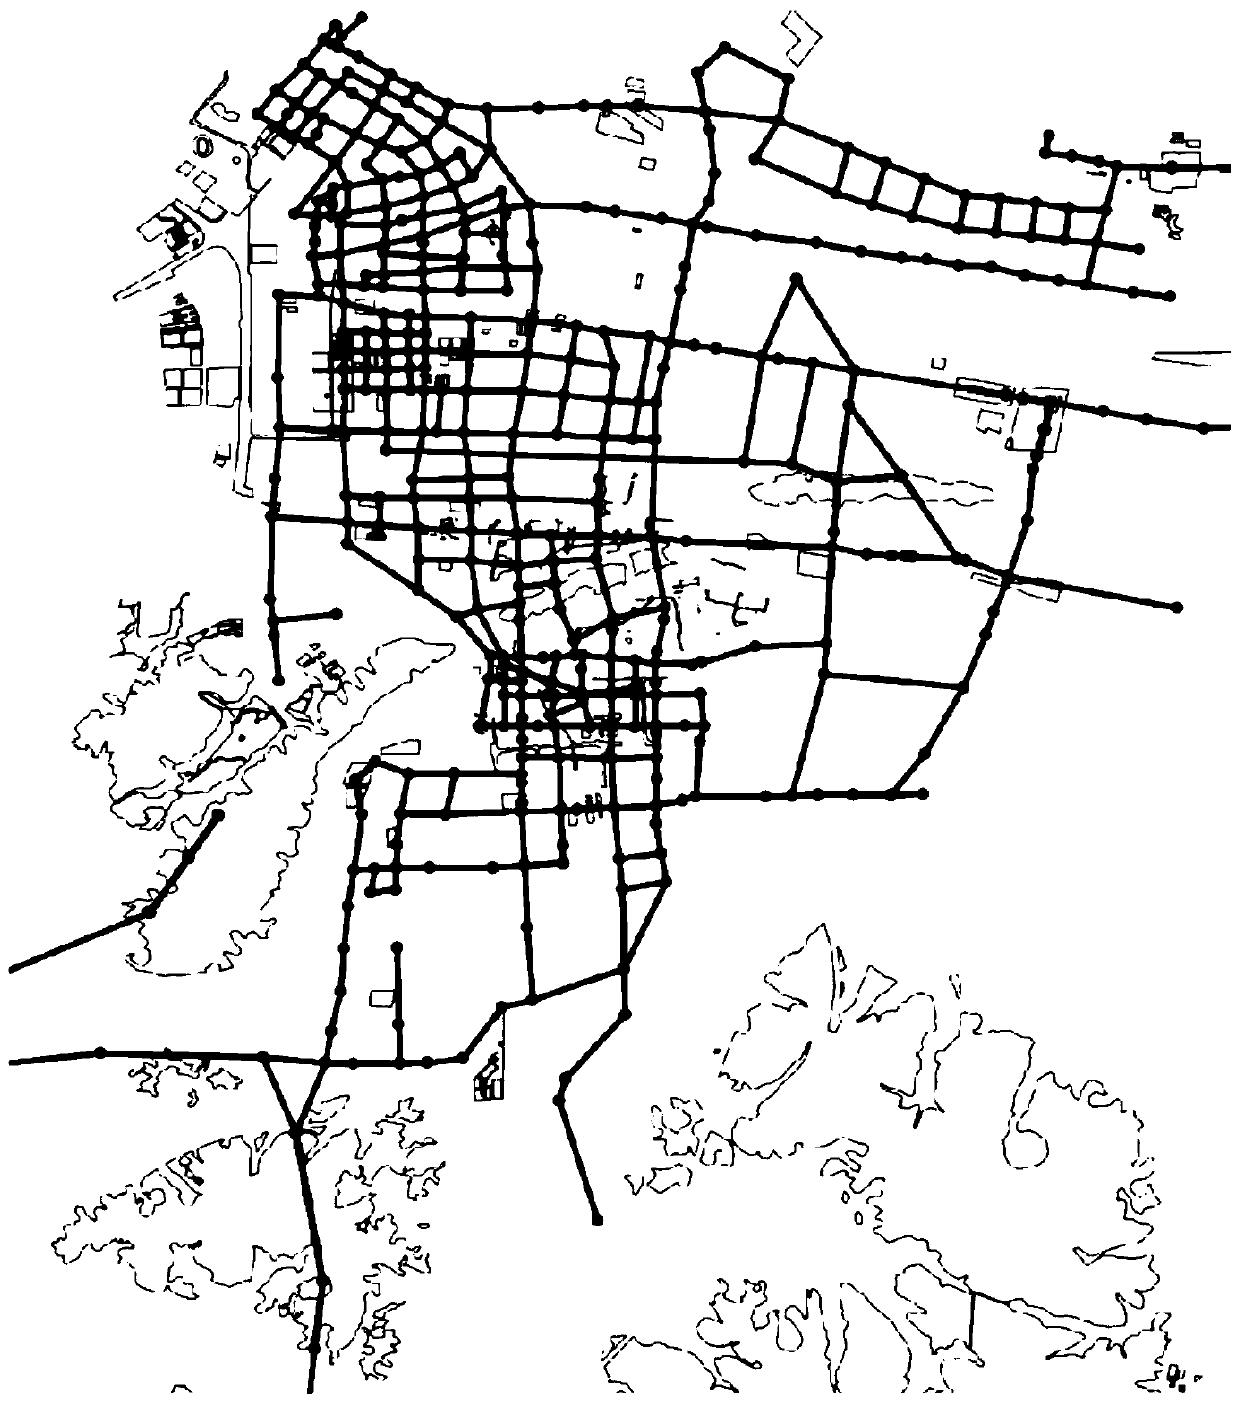 Congested road section modeling and evaluation method based on complex network